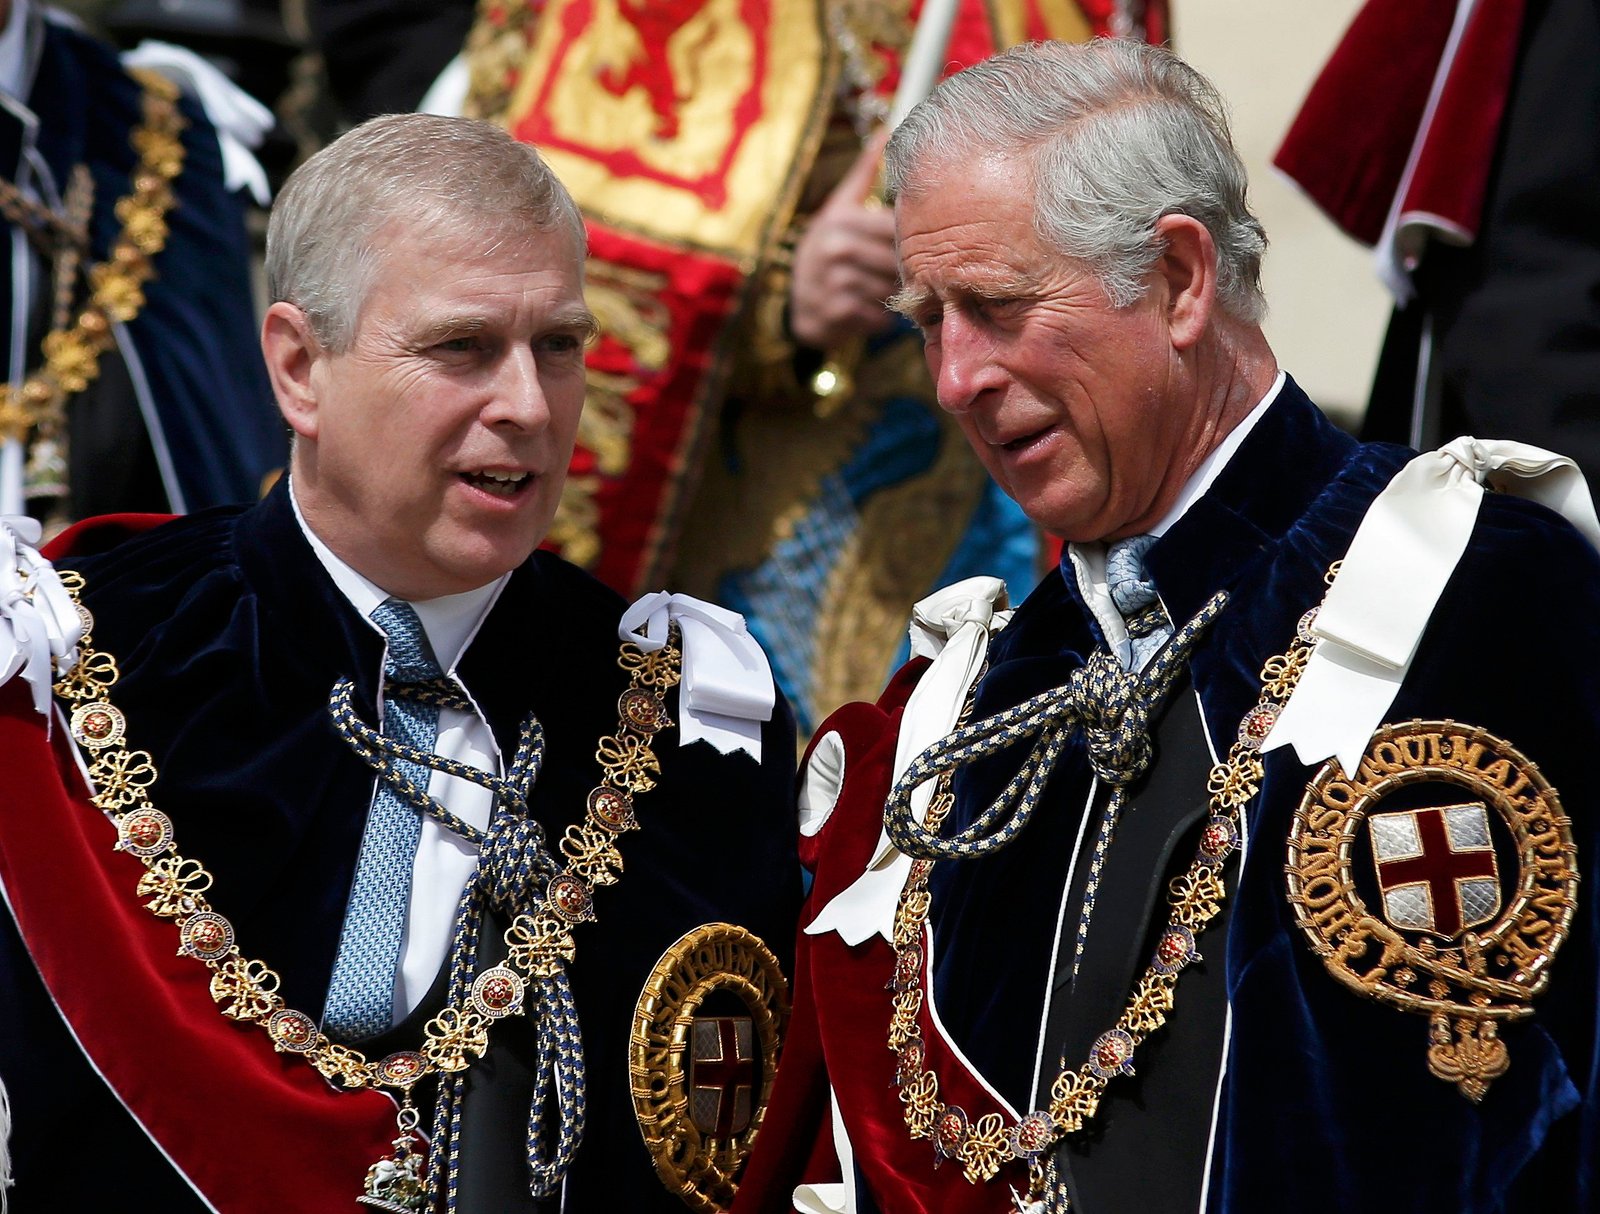 King Charles urged to cut ties with Prince Andrew